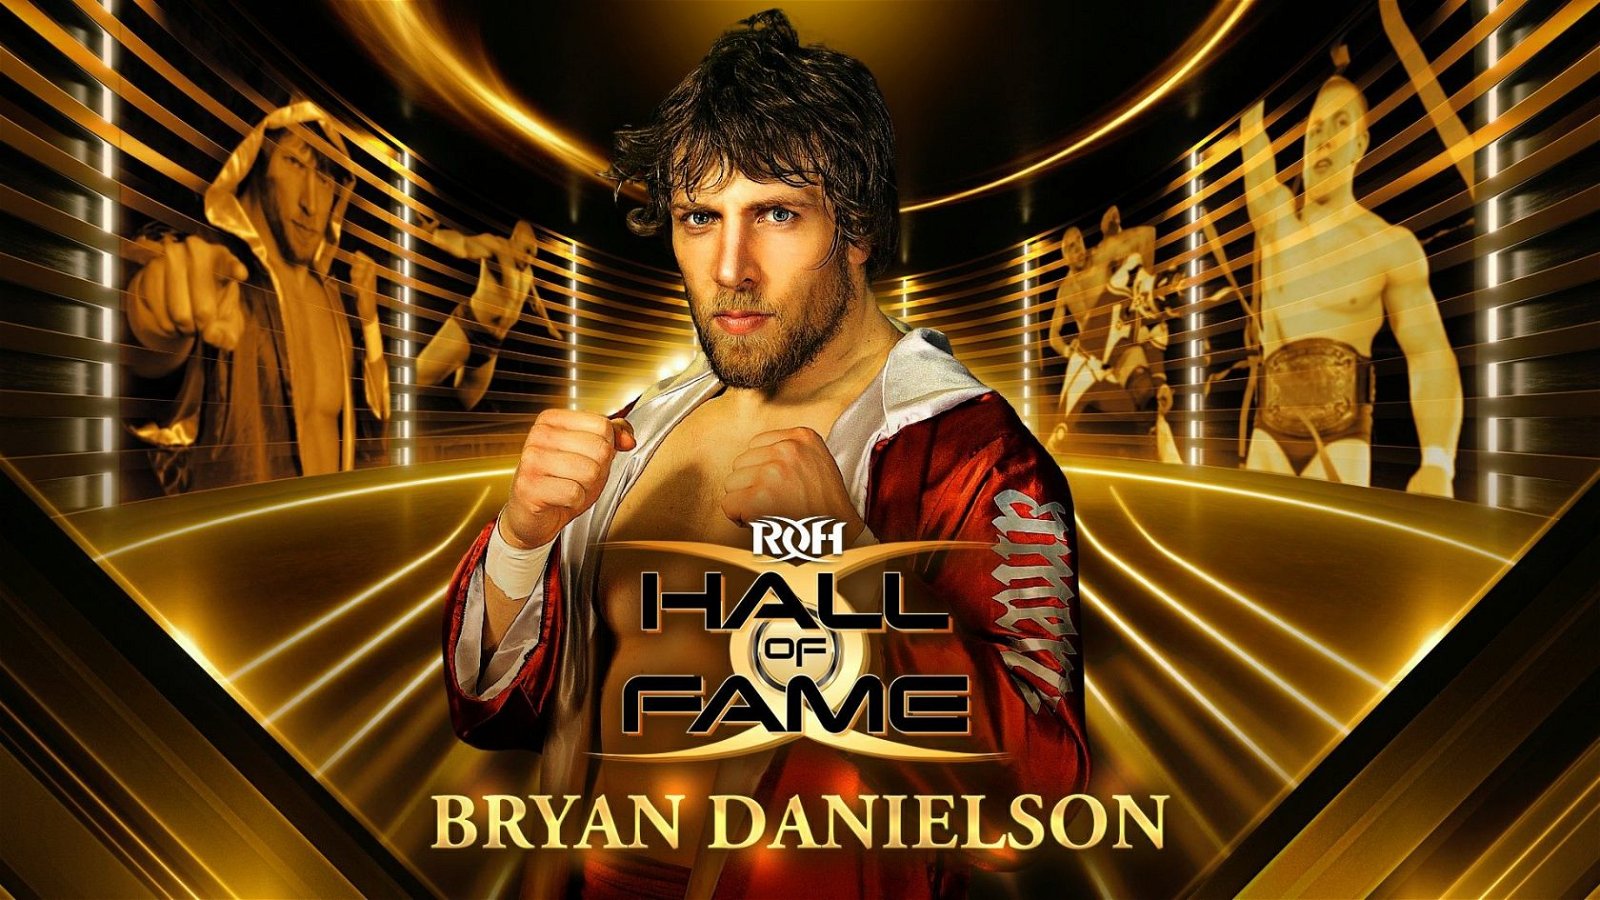 Bryan Danielson To Be Inducted Into Ring Of Honor Hall Of Fame